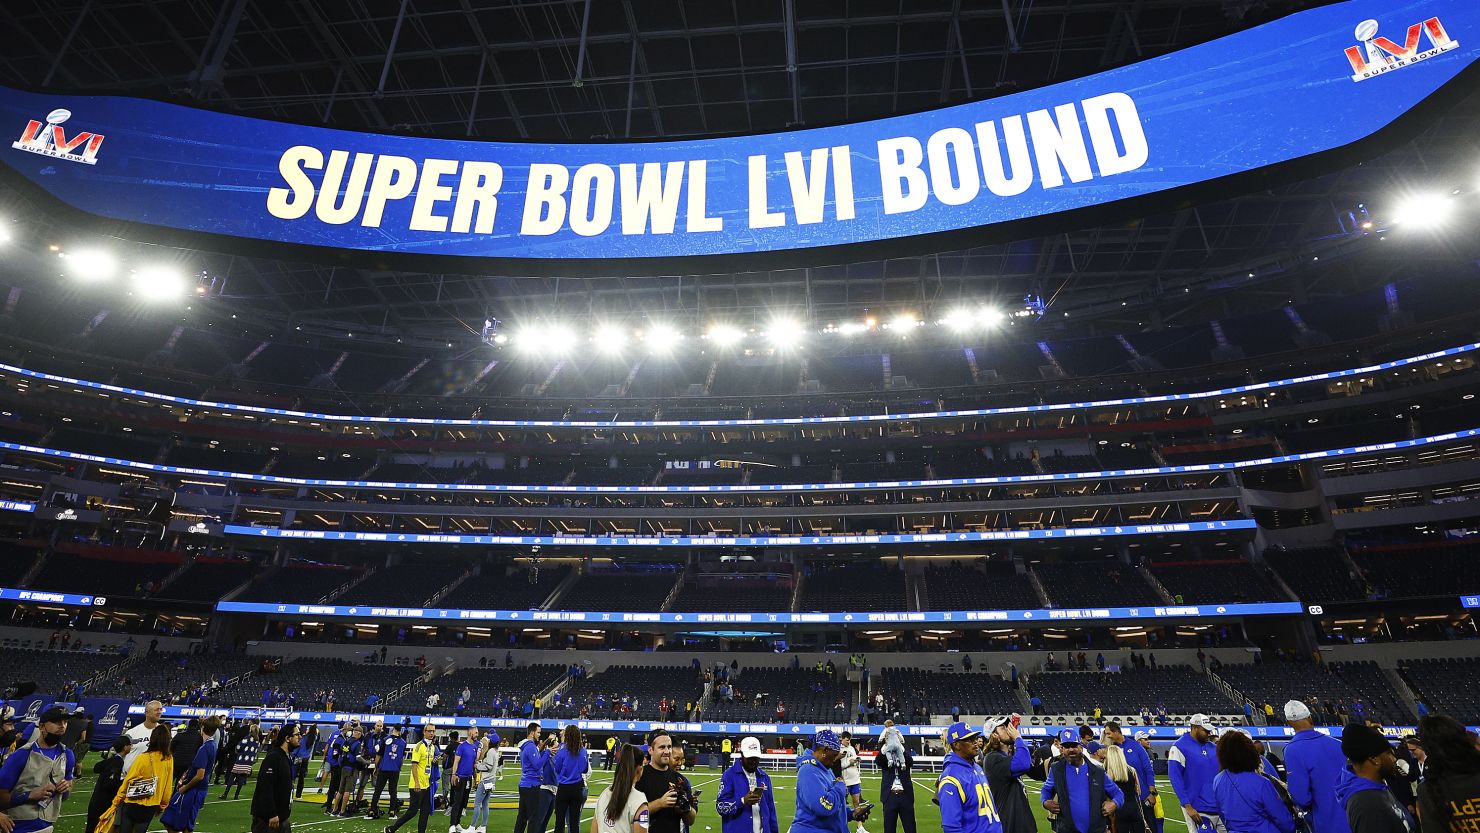 The jumbotron reads "Super Bowl LVI Bound" on January 30, 2022, after the Los Angeles Rams defeated the San Francisco 49ers 20-17 in the NFC Championship Game at SoFi Stadium in Inglewood, California. 